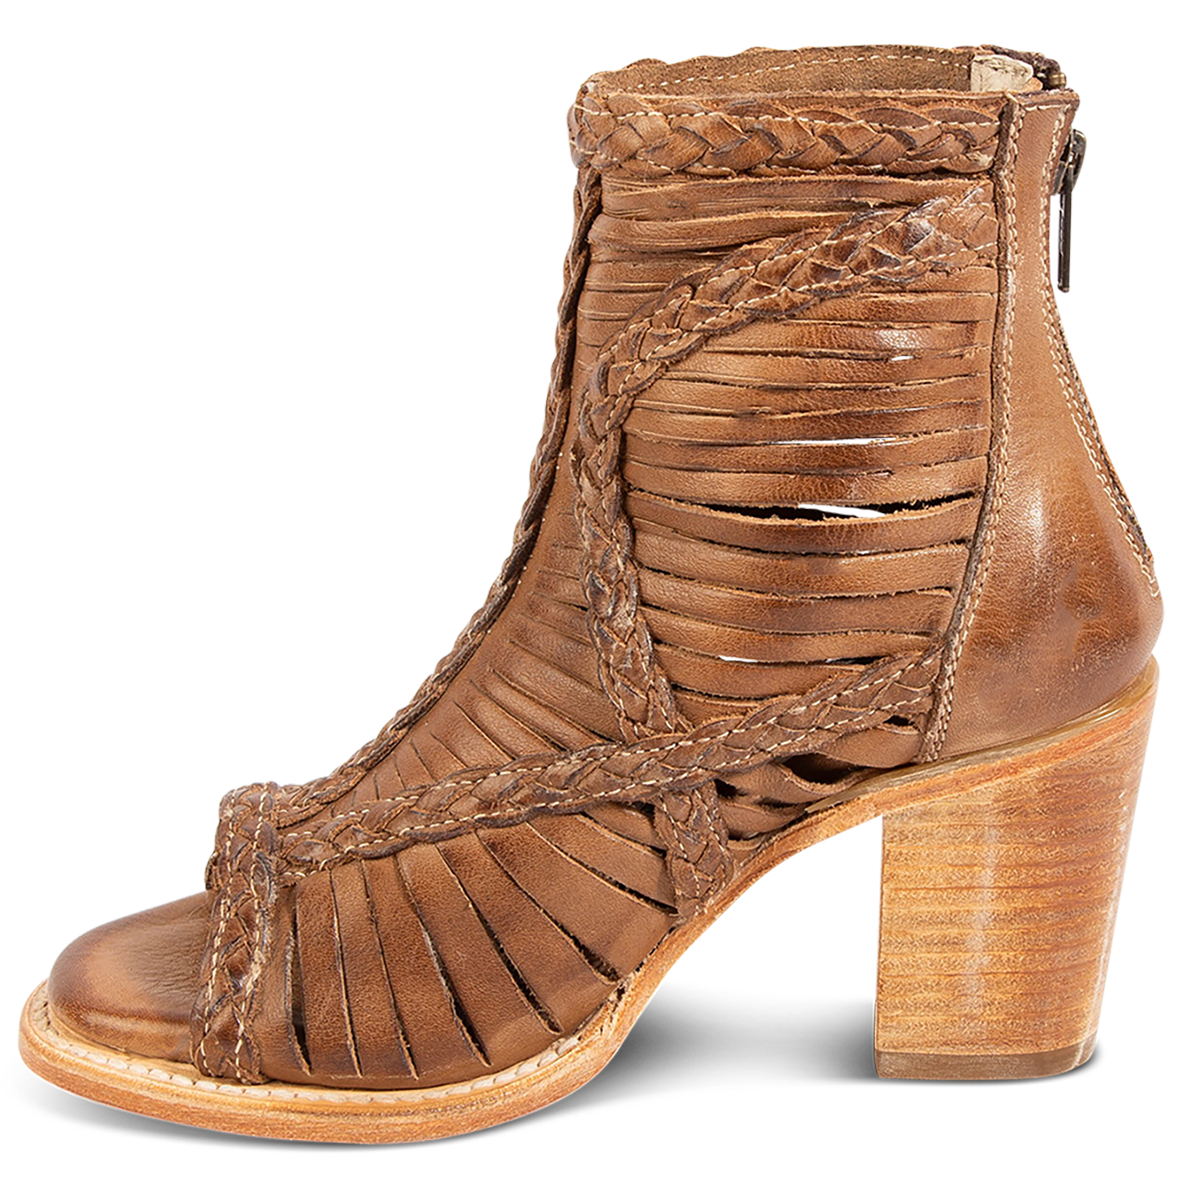 Inside view showing laser cut leather, detailed braided accents and a stacked heel on FREEBIRD women's Bela wheat leather sandal